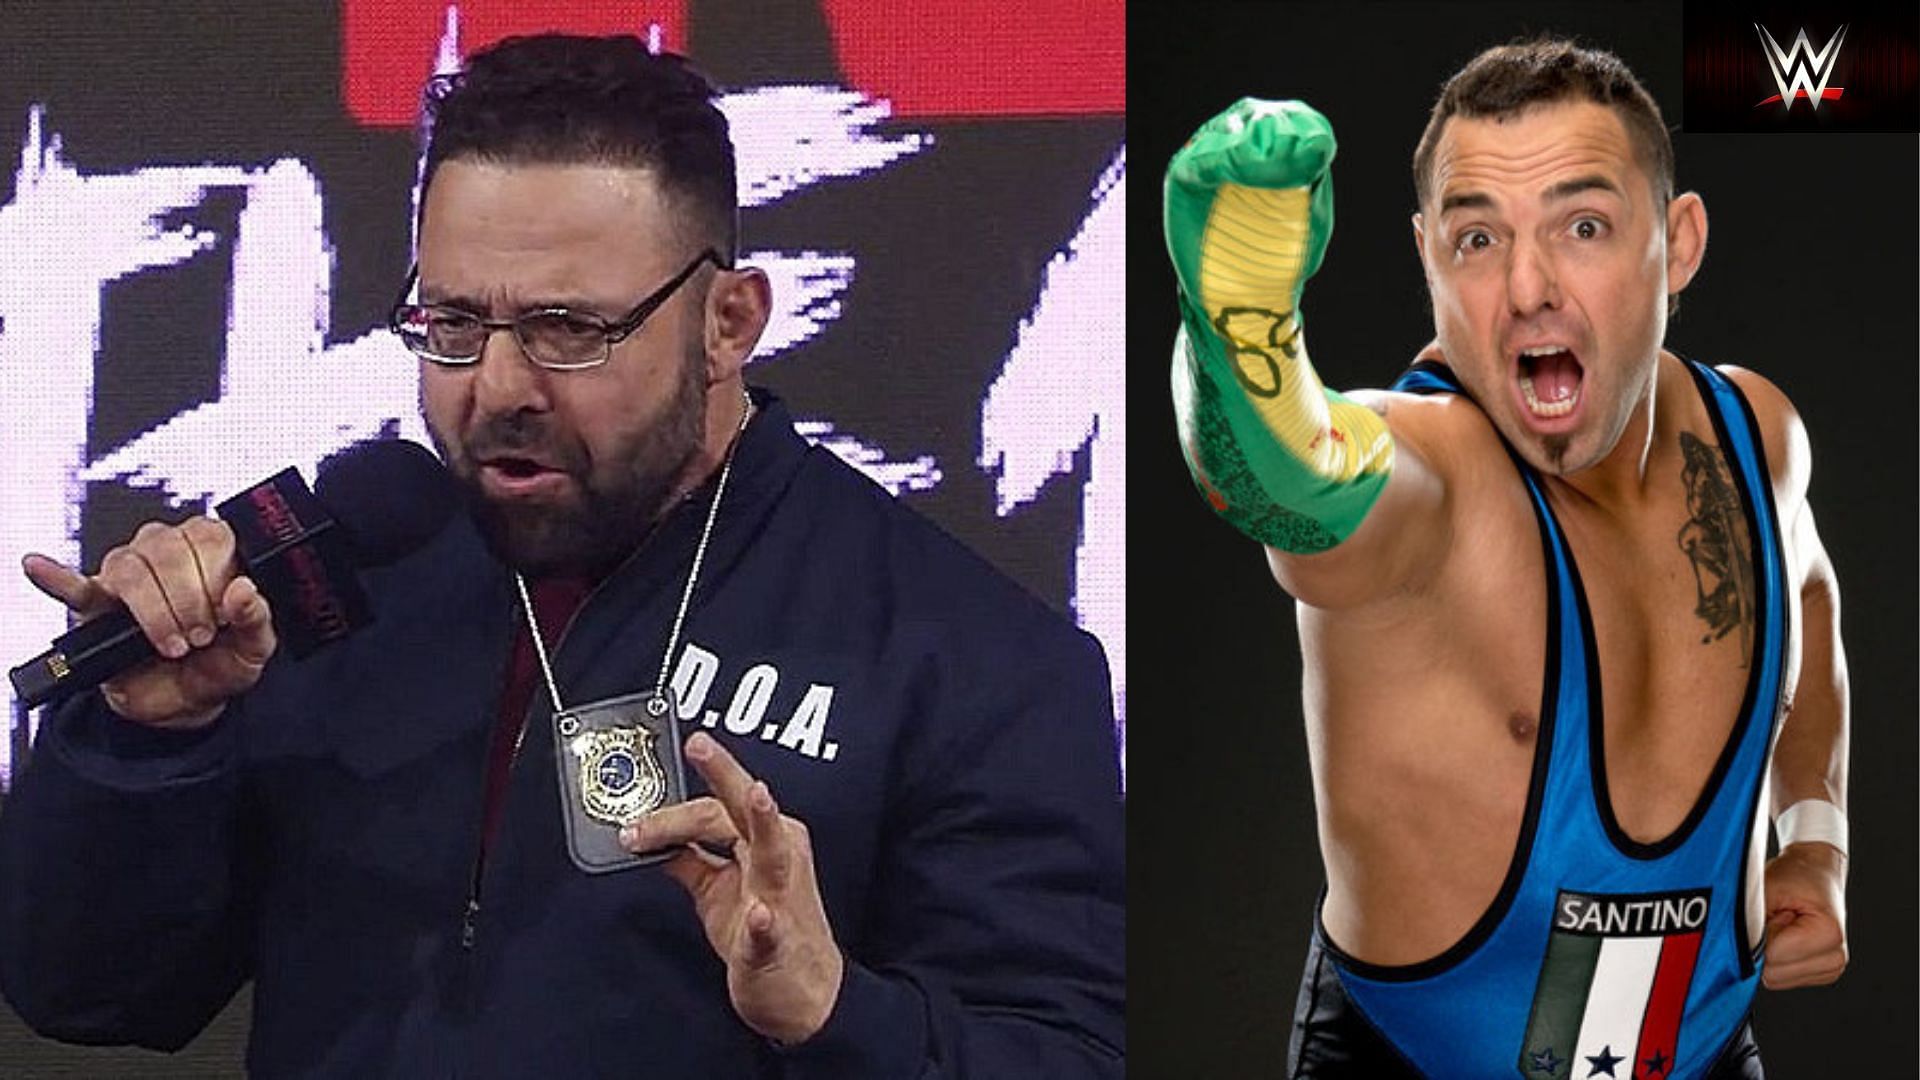 Santino Marella has officially joined Impact Wrestling